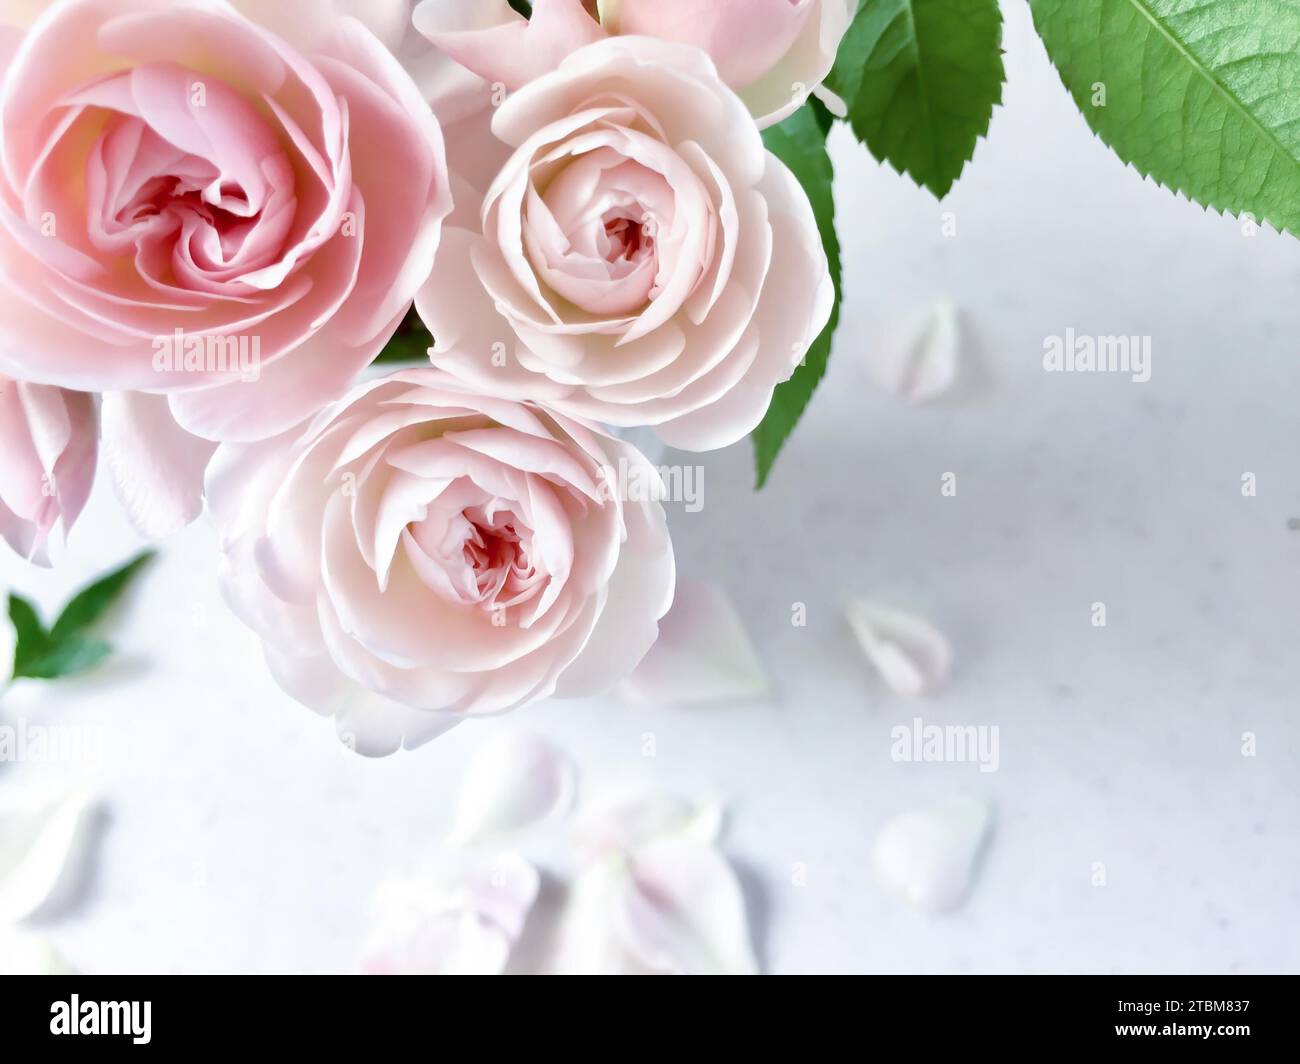 Bouquet of beautiful pink roses Stock Photo